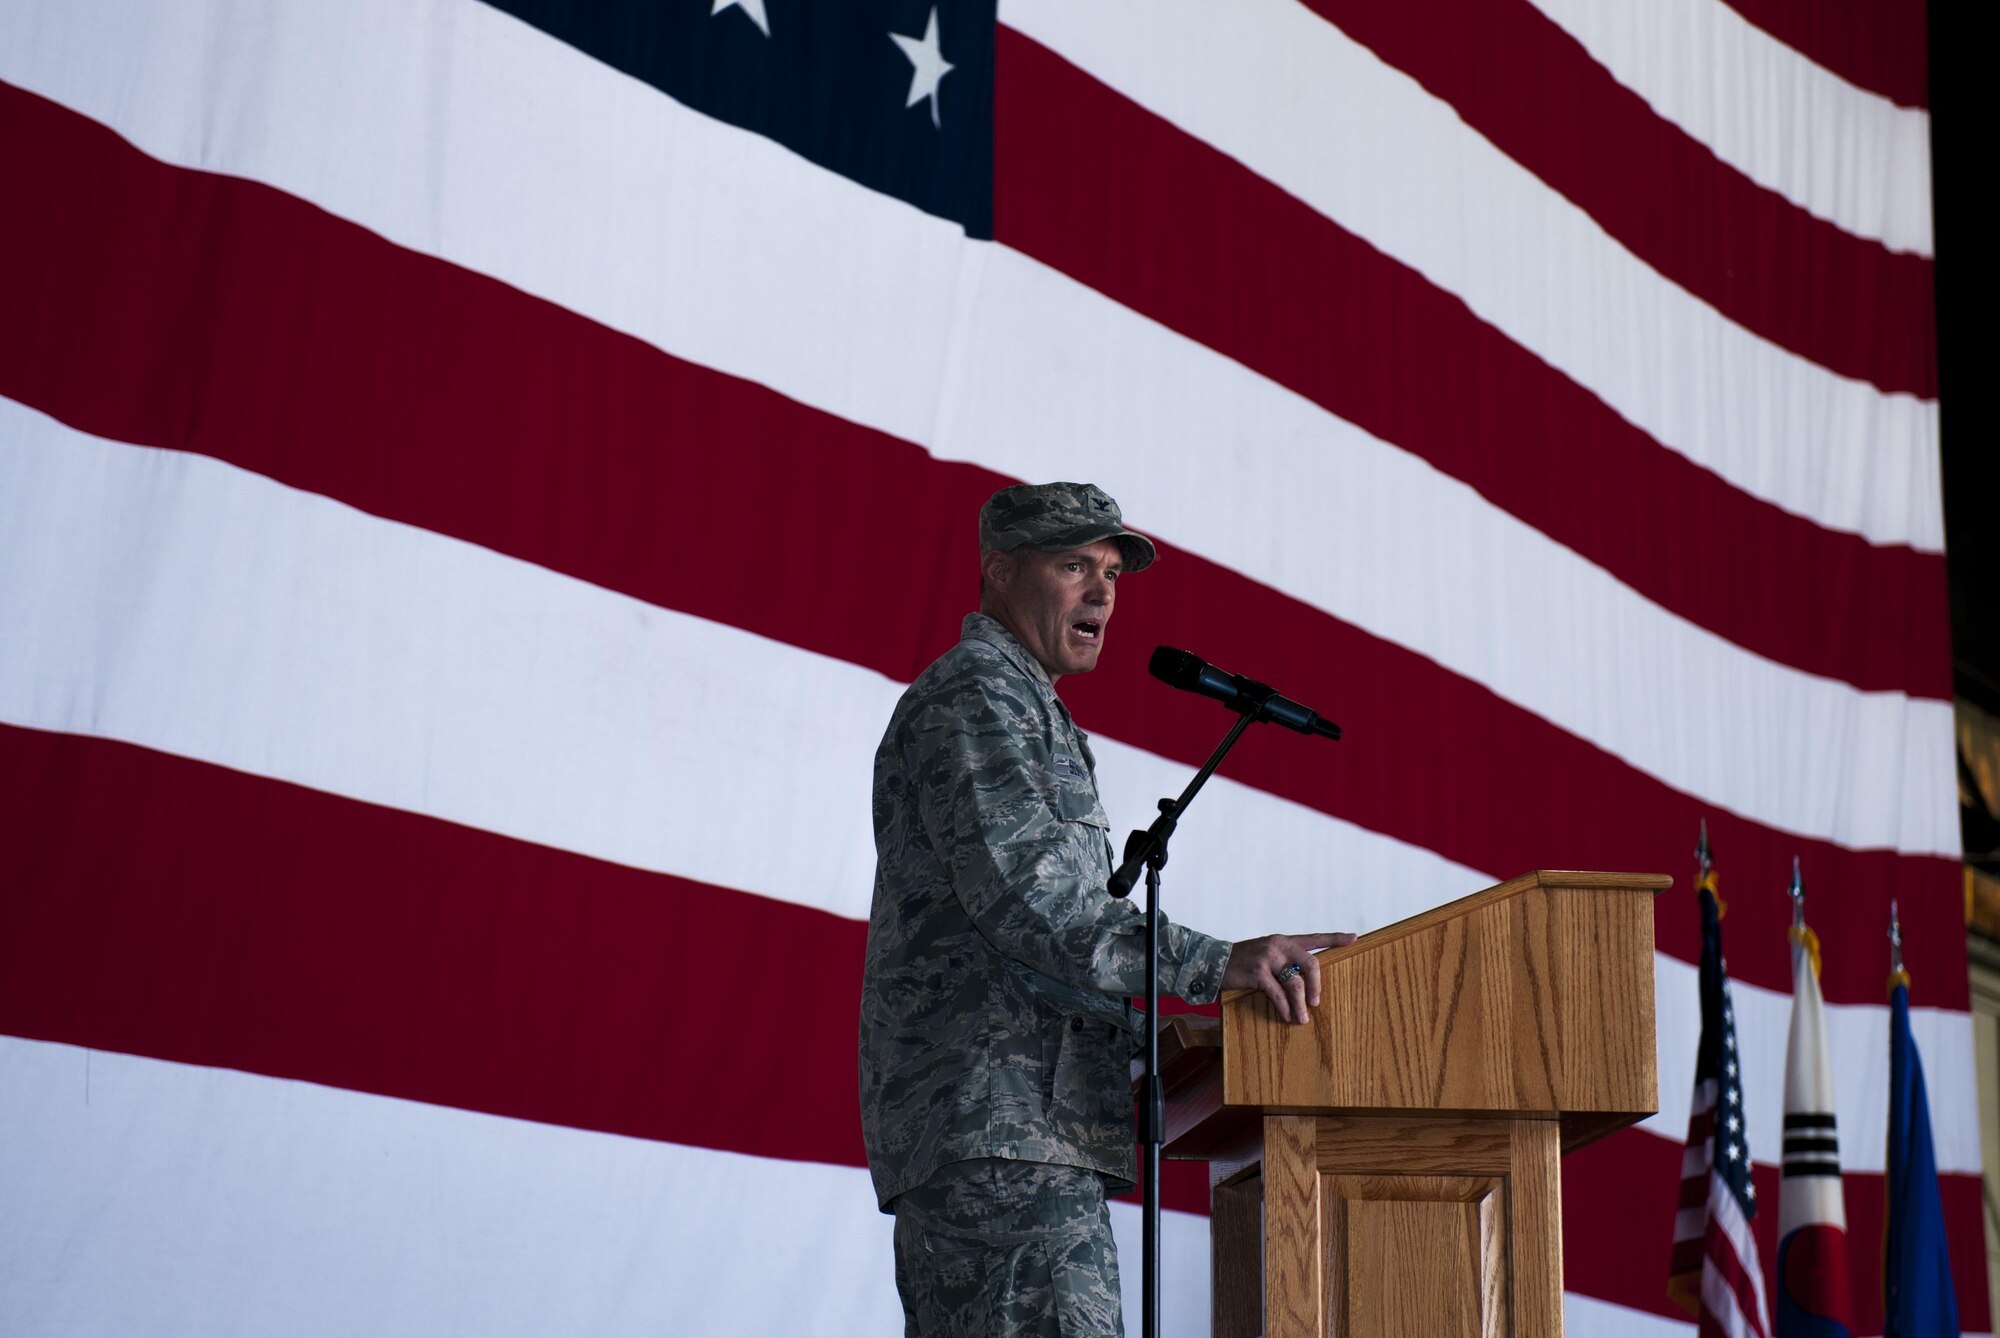 U.S. Air Force Col. George Sebren, 8th Maintenance Group commander, speaks to the 8th Fighter Wing June 28, 2017, during a change of command ceremony at Kunsan Air Base, Republic of Korea. Sebren took command of the 8th MXG from Col. James Long and, upon assuming the position, received the title of “Phoenix.” (U.S. Air Force photo by Senior Airman Colville McFee/Released)